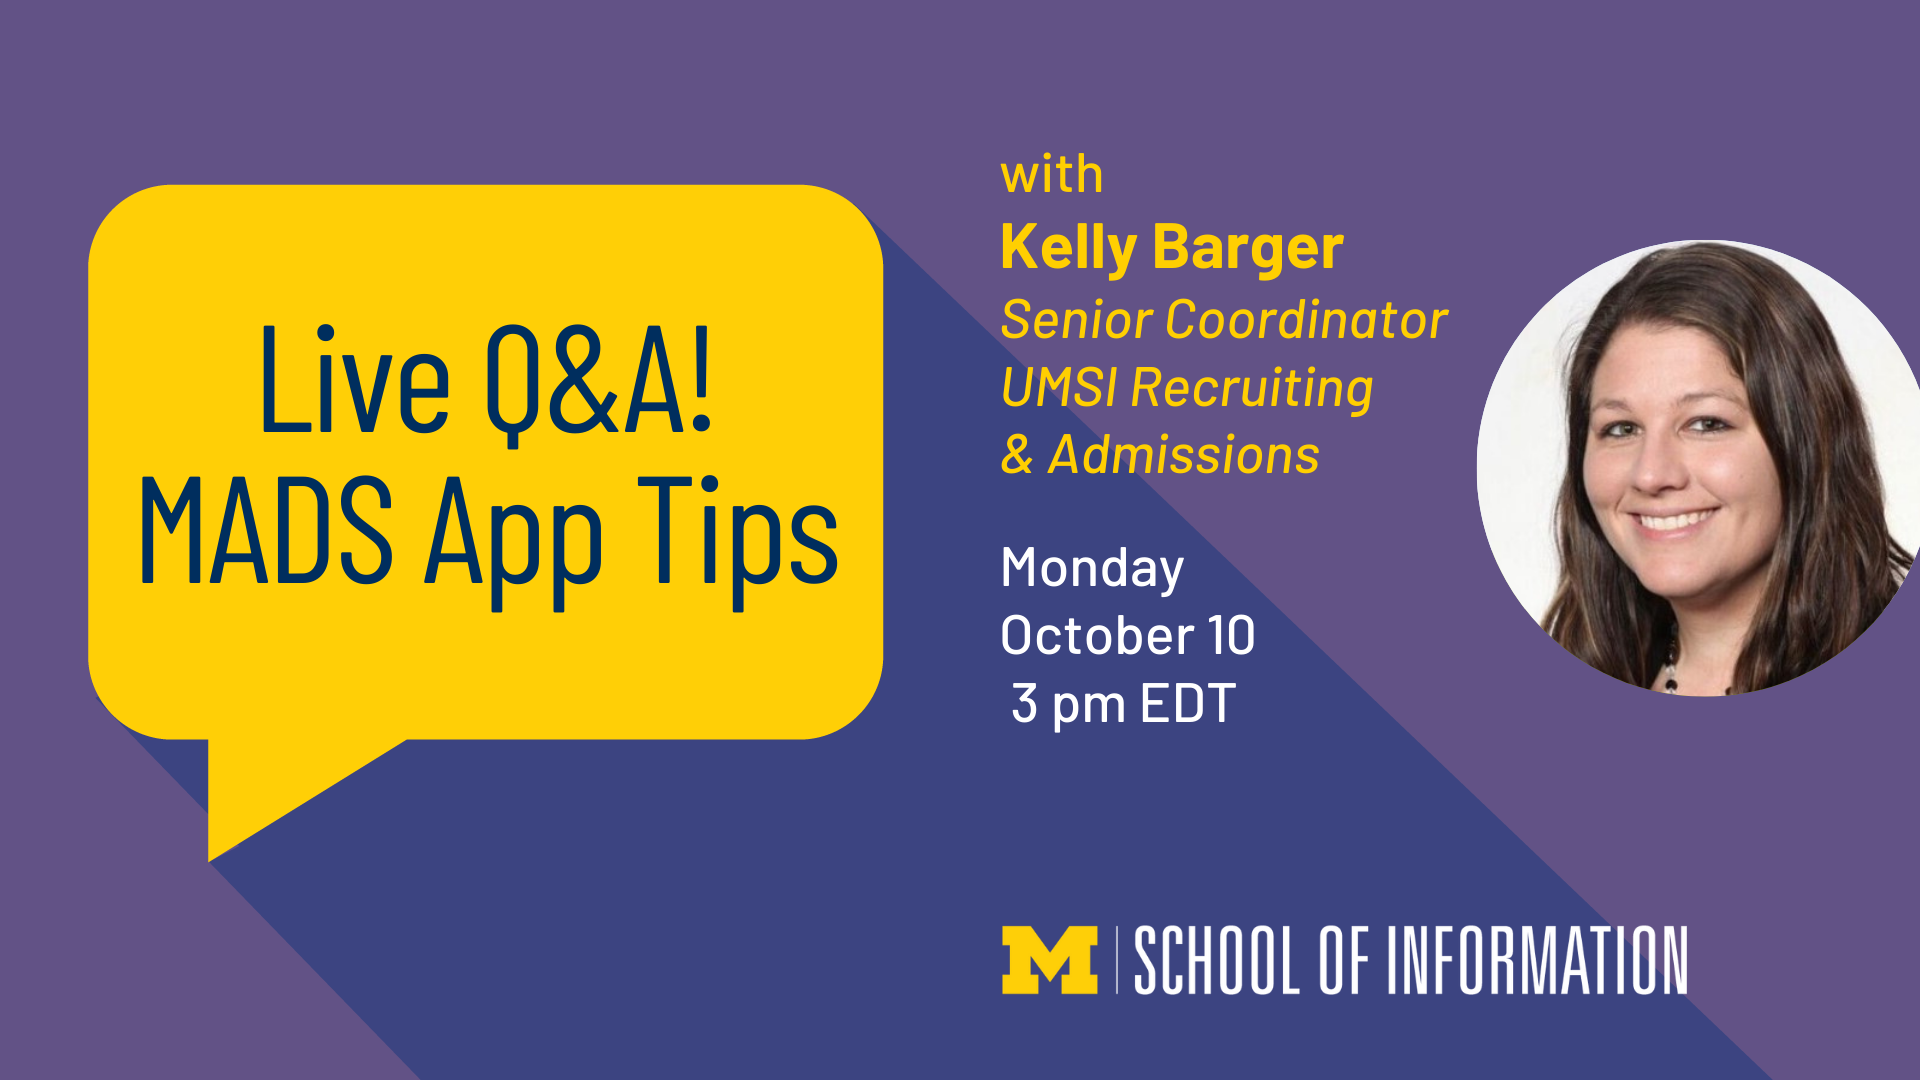 "Live Q&A! MADS App Tips with Kelly Barger, Senior Coordinator, UMSI Recruiting & Admissions. Monday, October 10. 3 pm EDT."